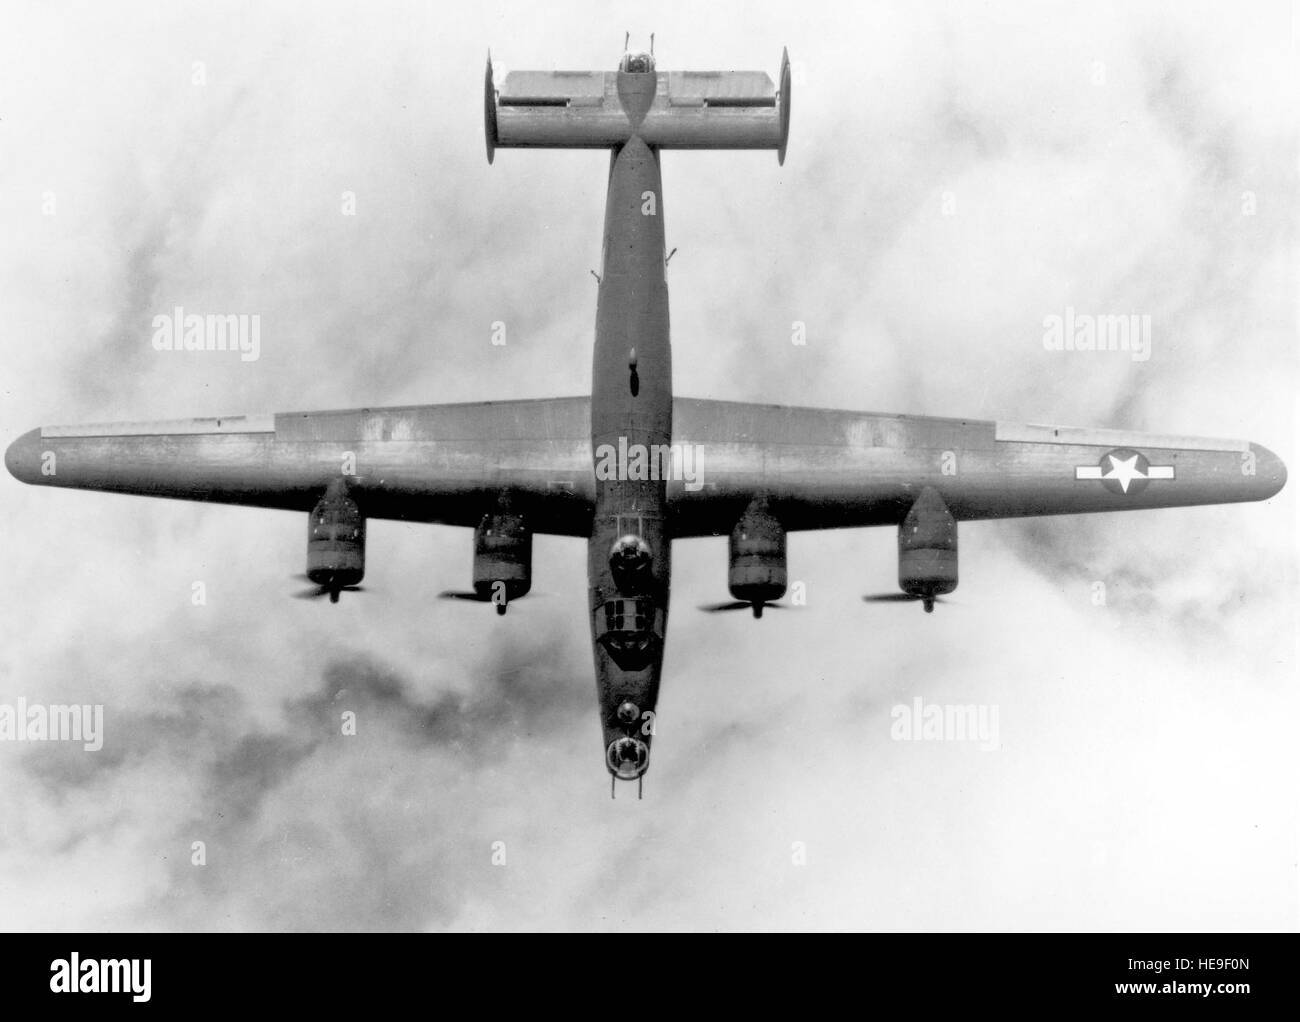 The Consolidated B-24 Liberator was employed in operations in every combat theater during World War II. Because of its great range, it was particularly suited for long over-water missions in the European and Pacific Theater. Stock Photo